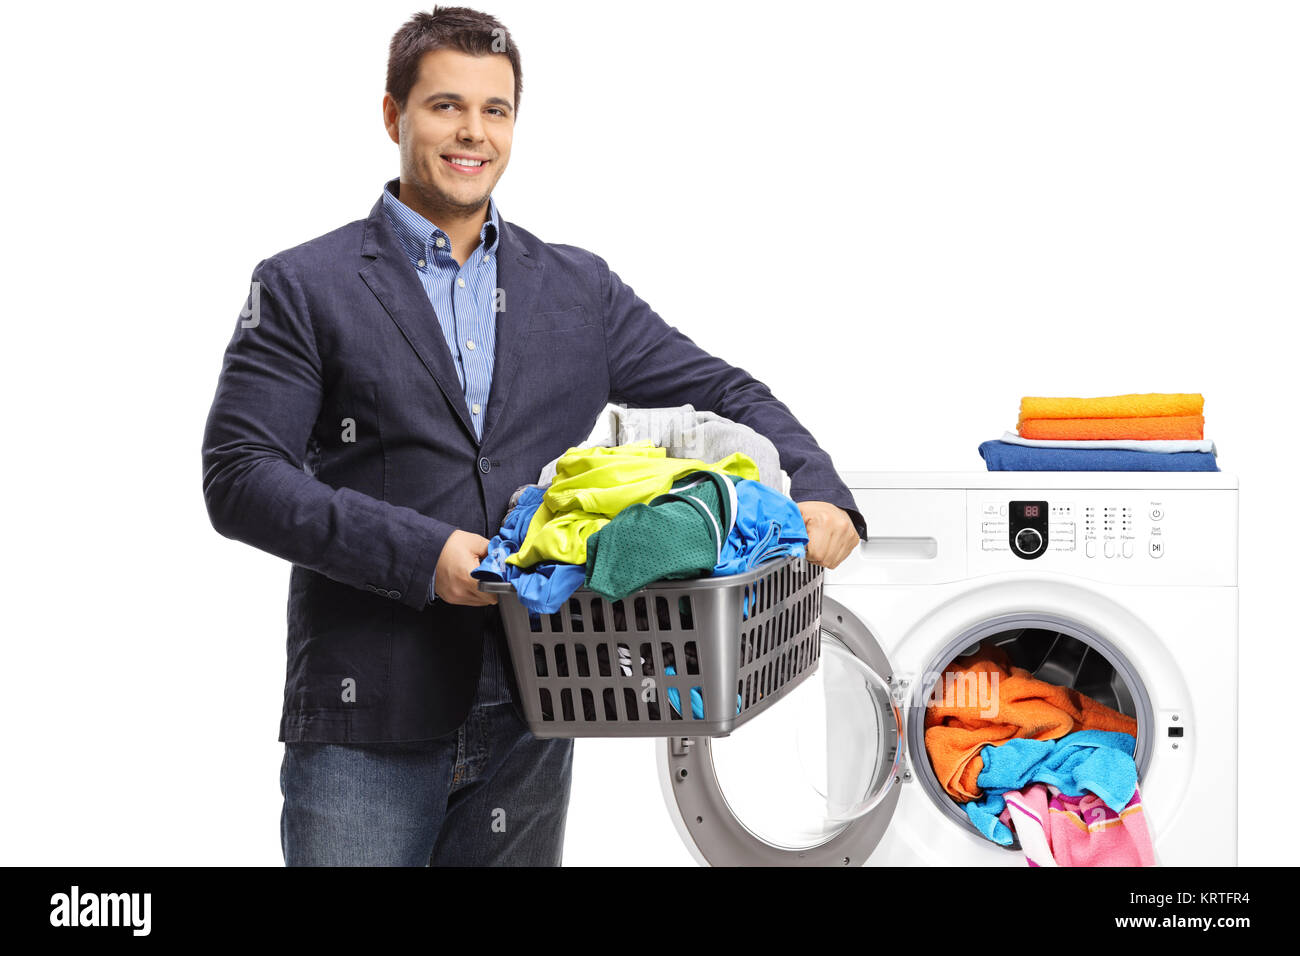 Elegant guy holding a laundry basket filled with clothes in front of a washing machine isolated on white background Stock Photo